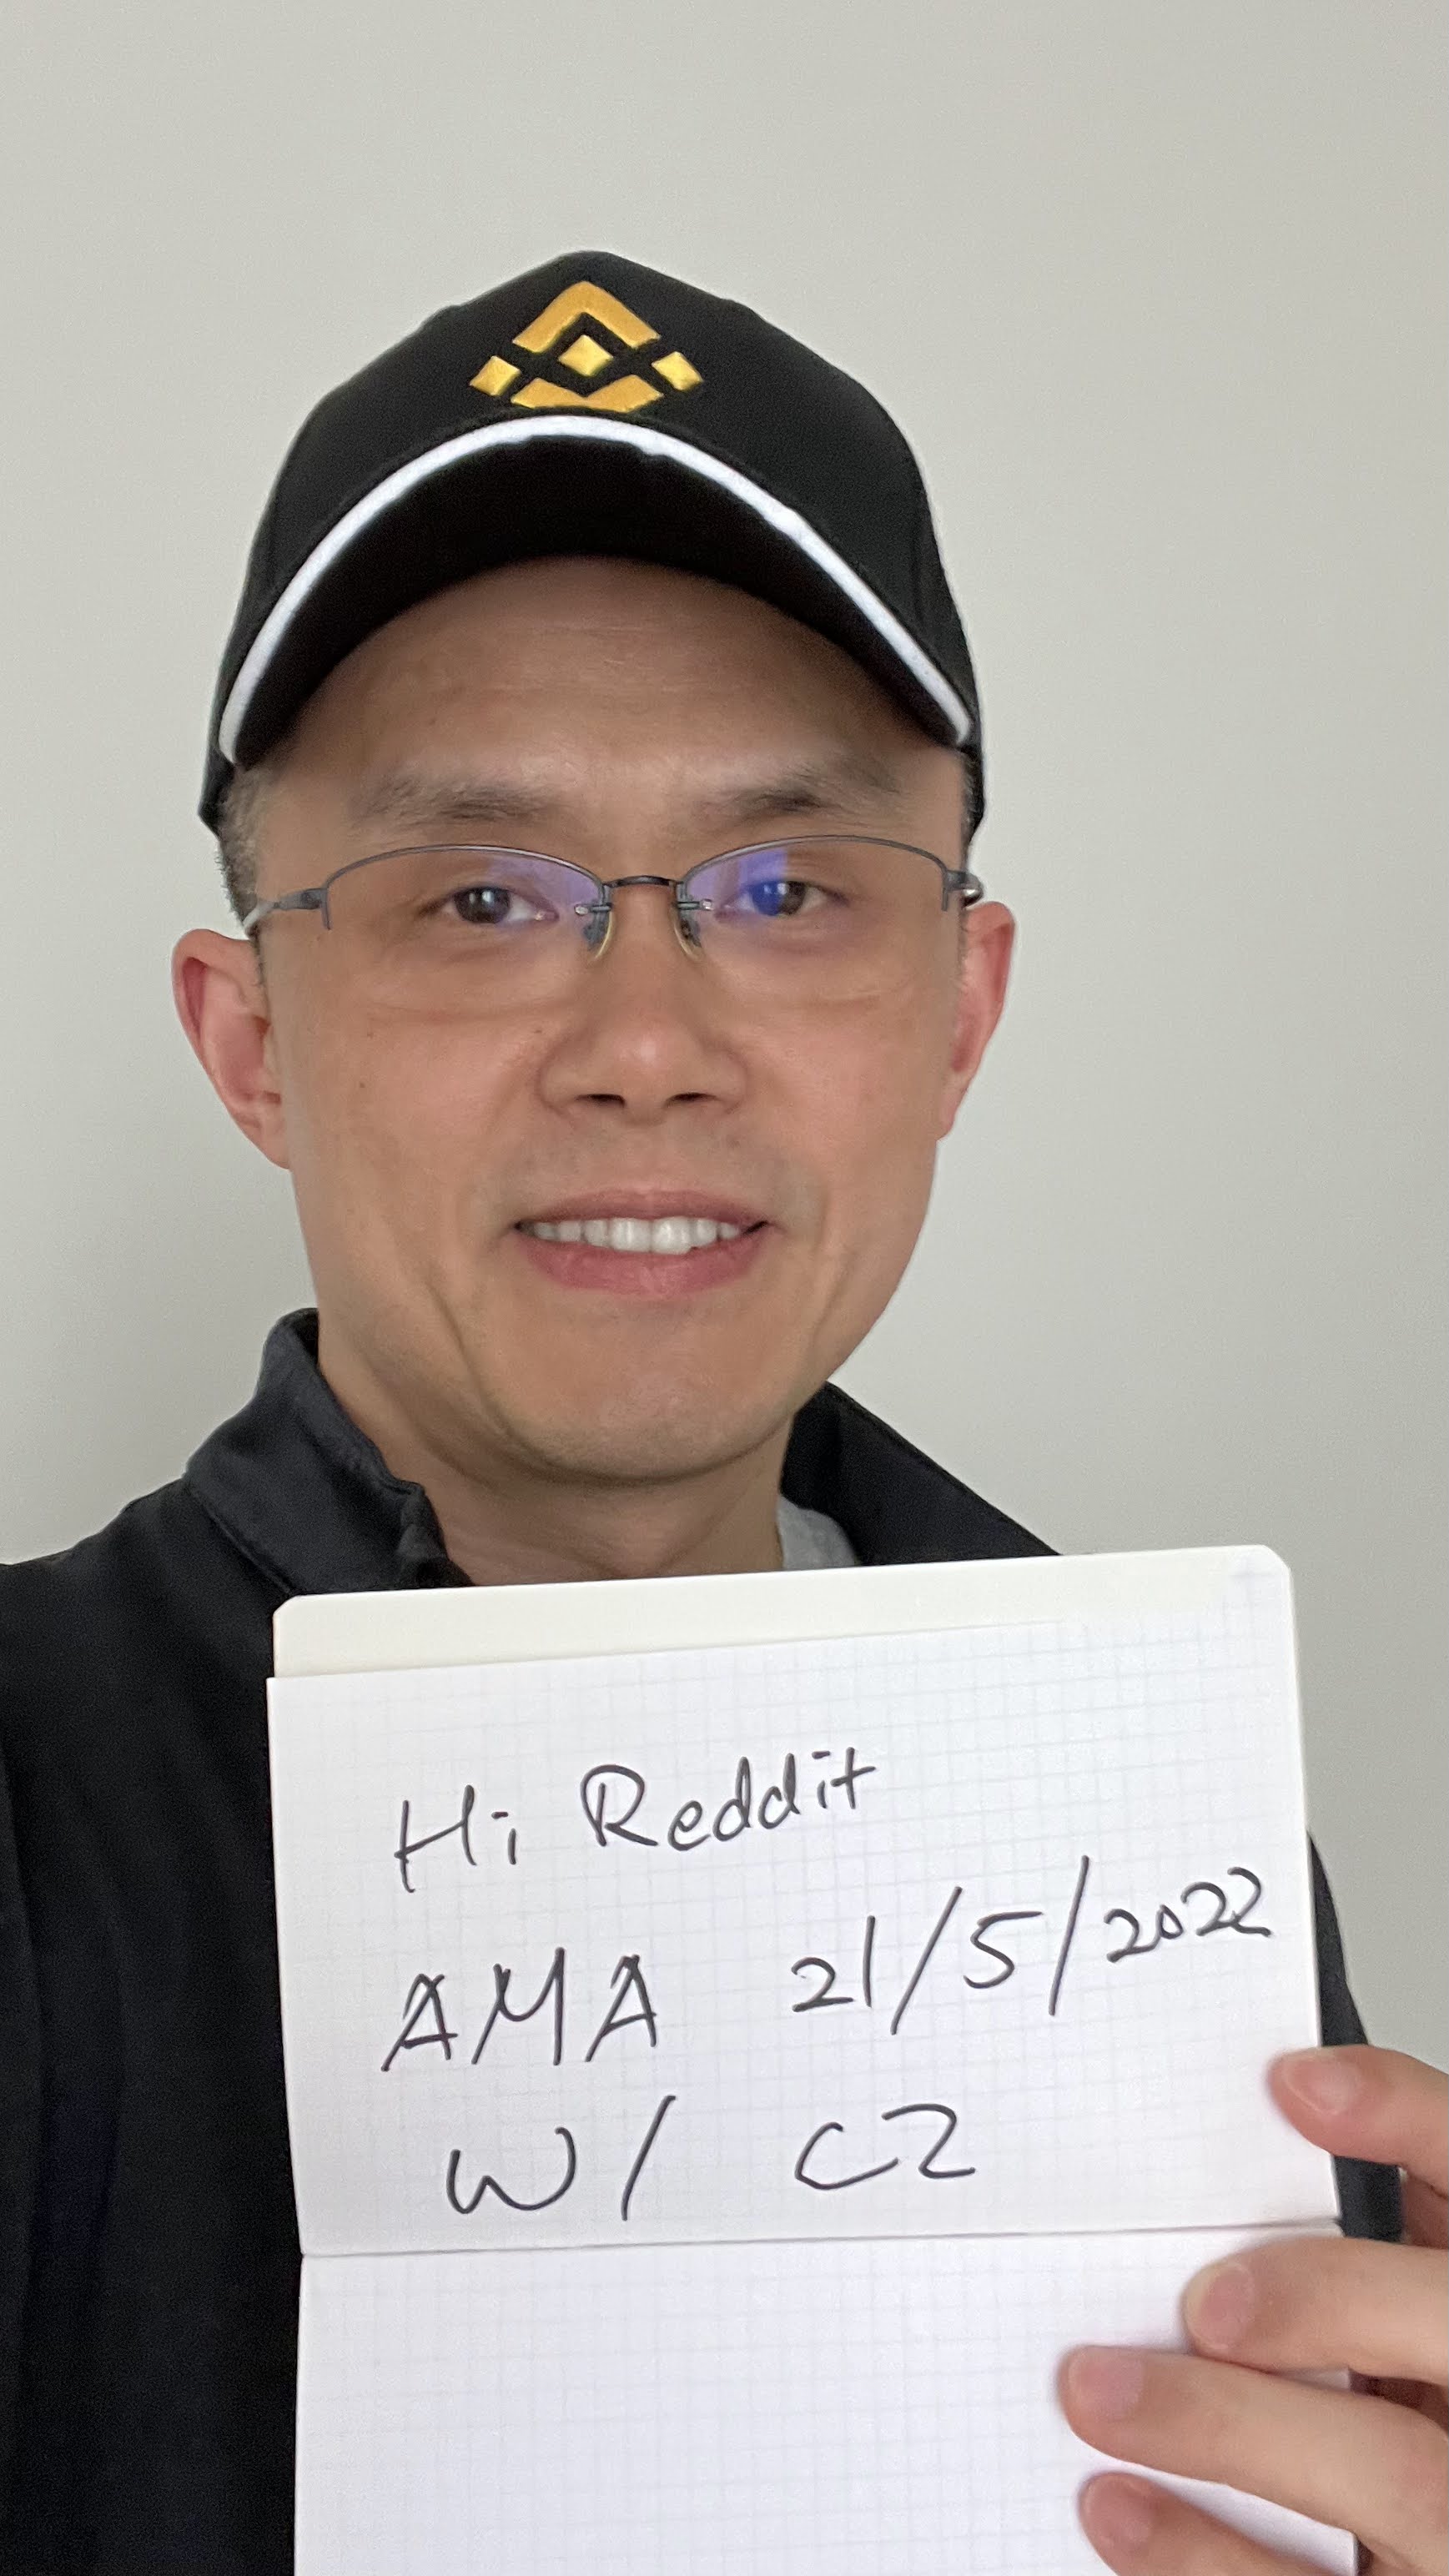 cz-binance-on-twitter-reddit-ama-starting-soon-ask-your-questions